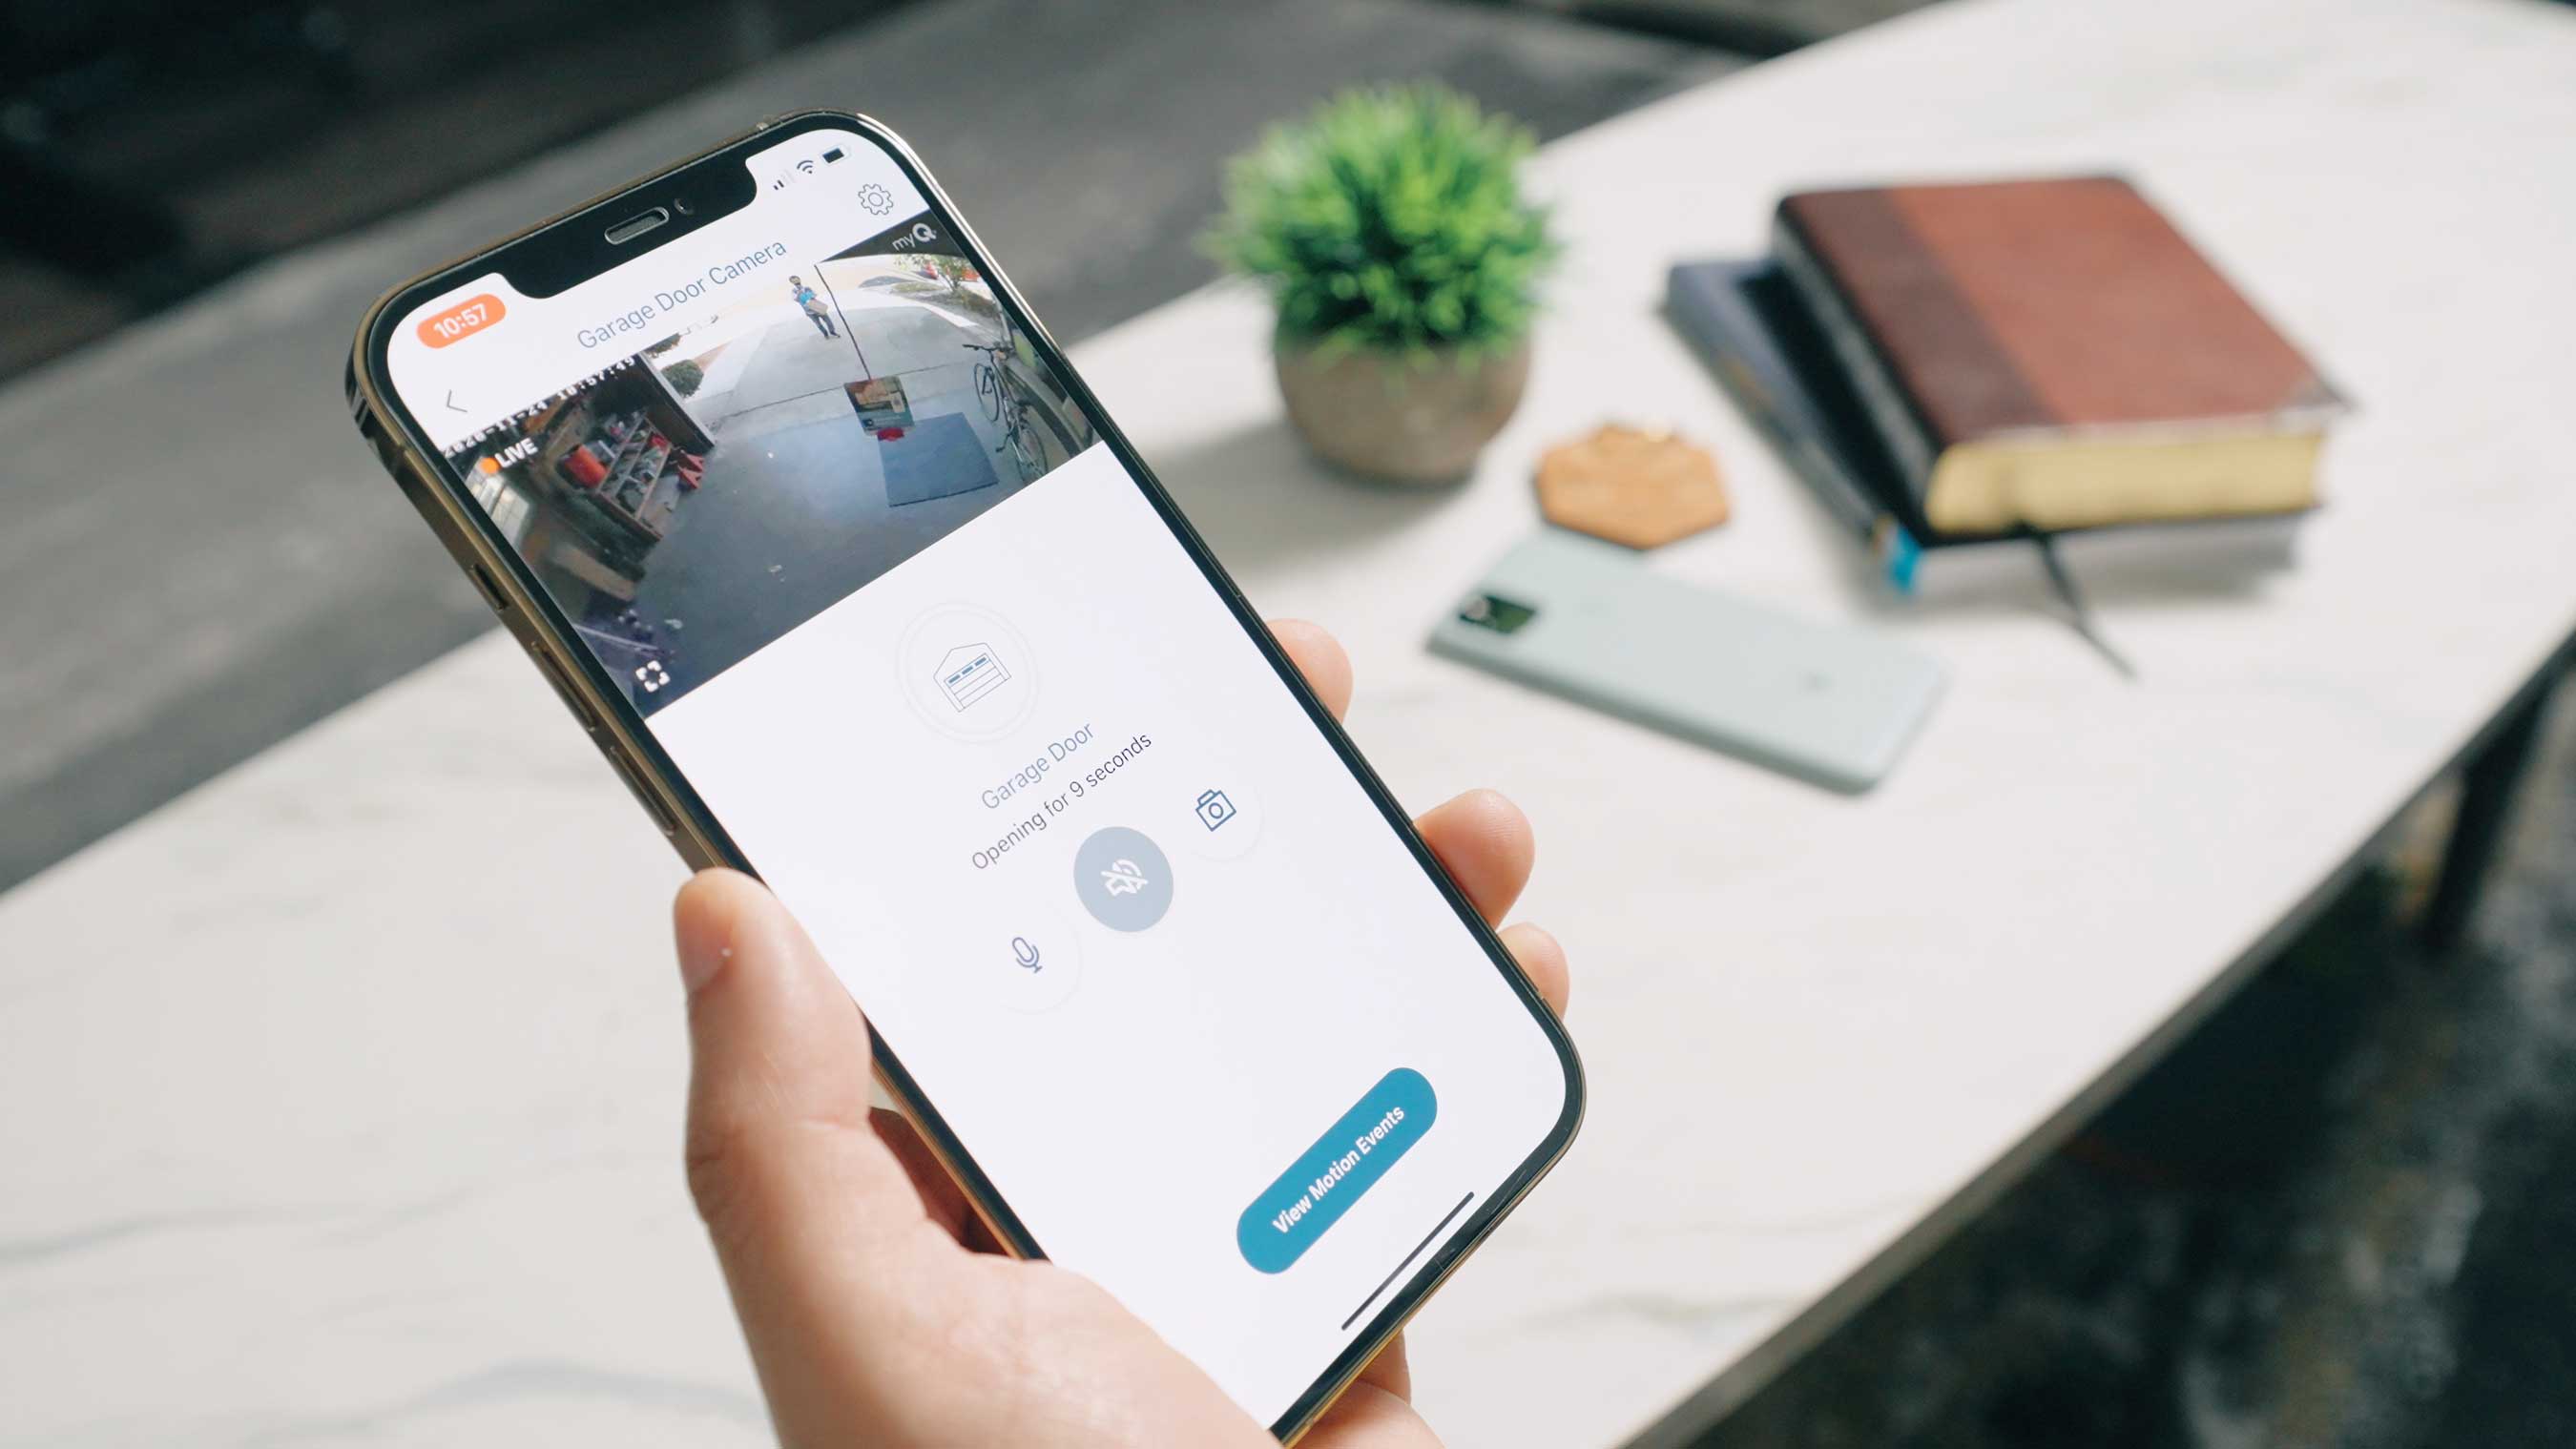 The myQ app works with Amazon Key In-Garage Delivery so packages and groceries can be securely delivered to the garage and you don’t have to worry about them going missing or being damaged by weather.